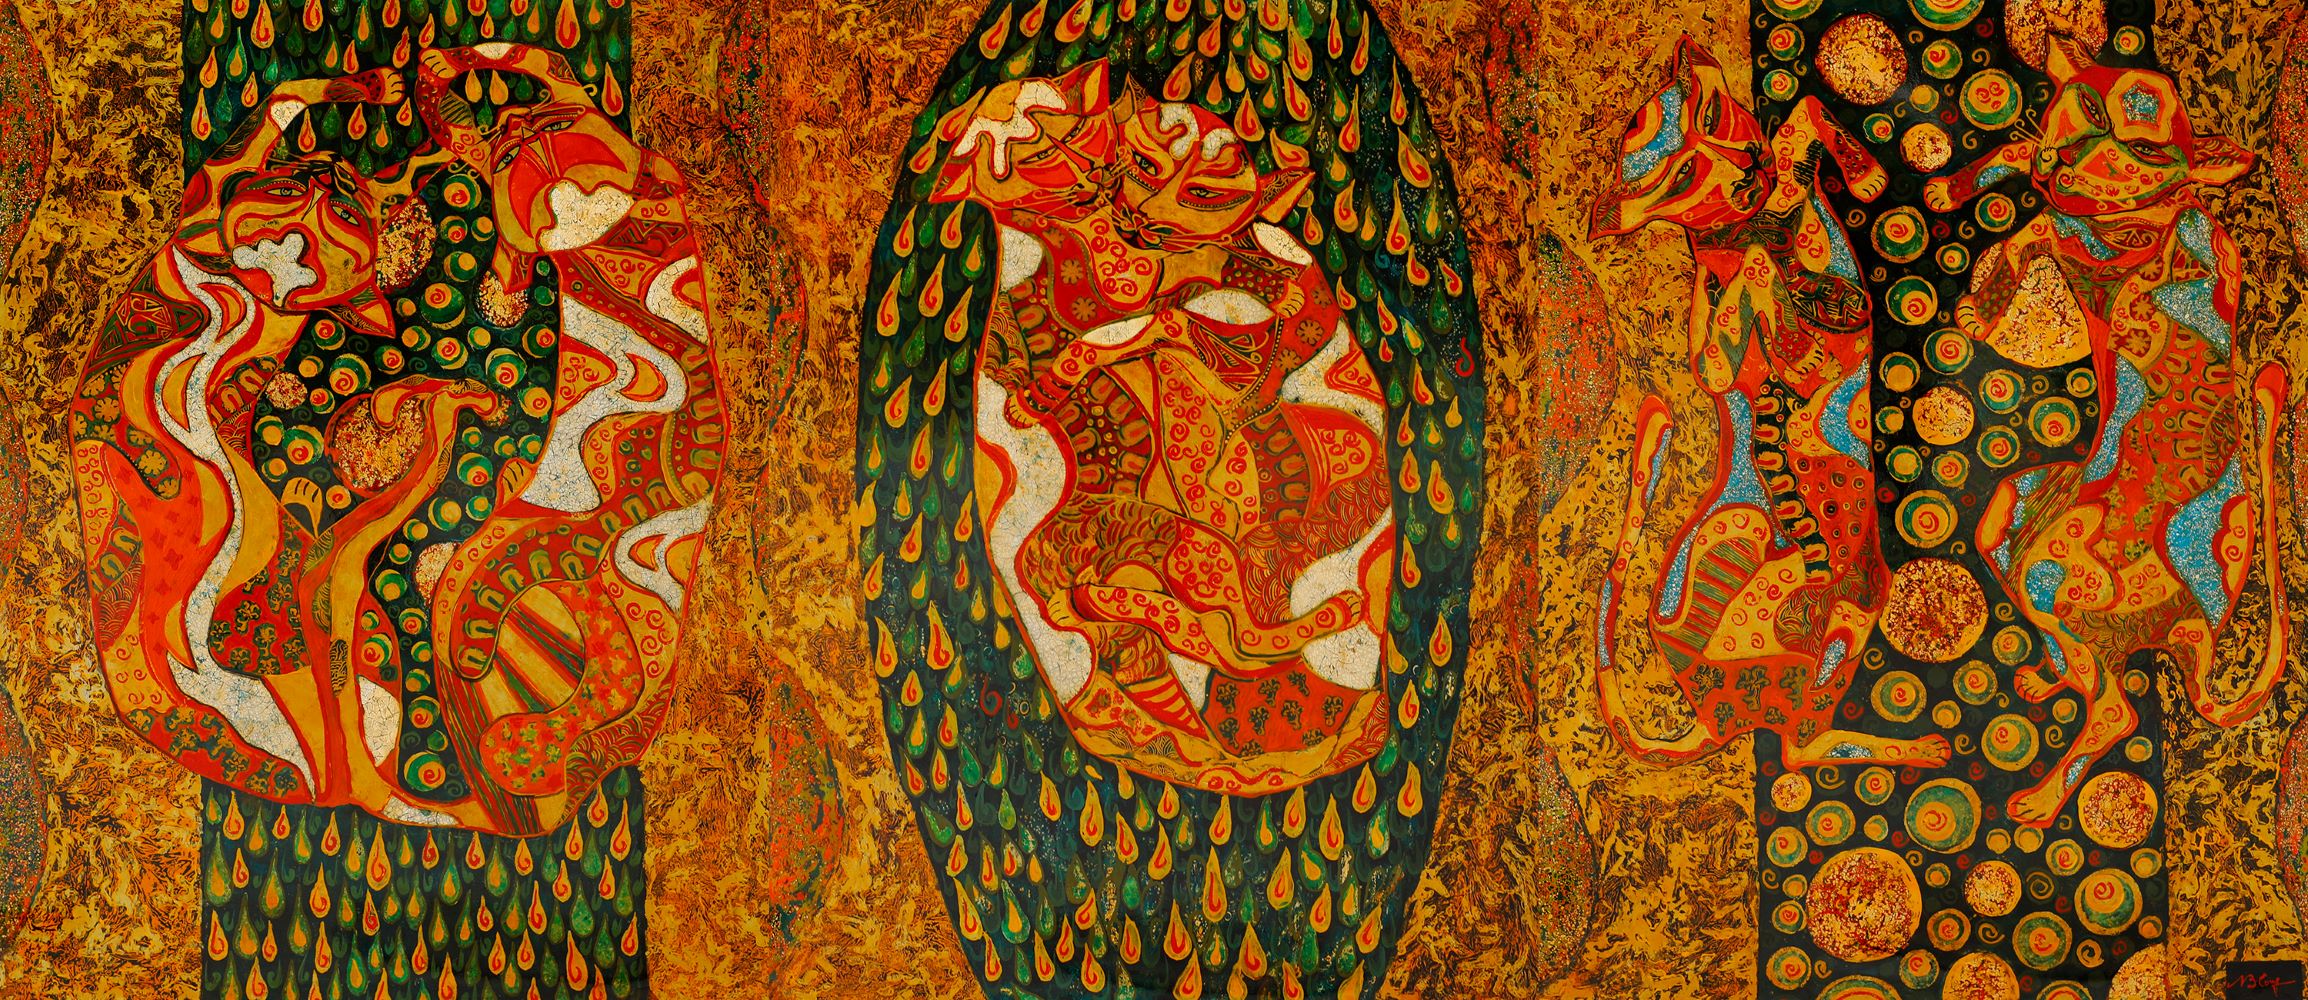 The Dance of Cats - Vietnamese Lacquer Painting by Artist Ngo Ba Cong